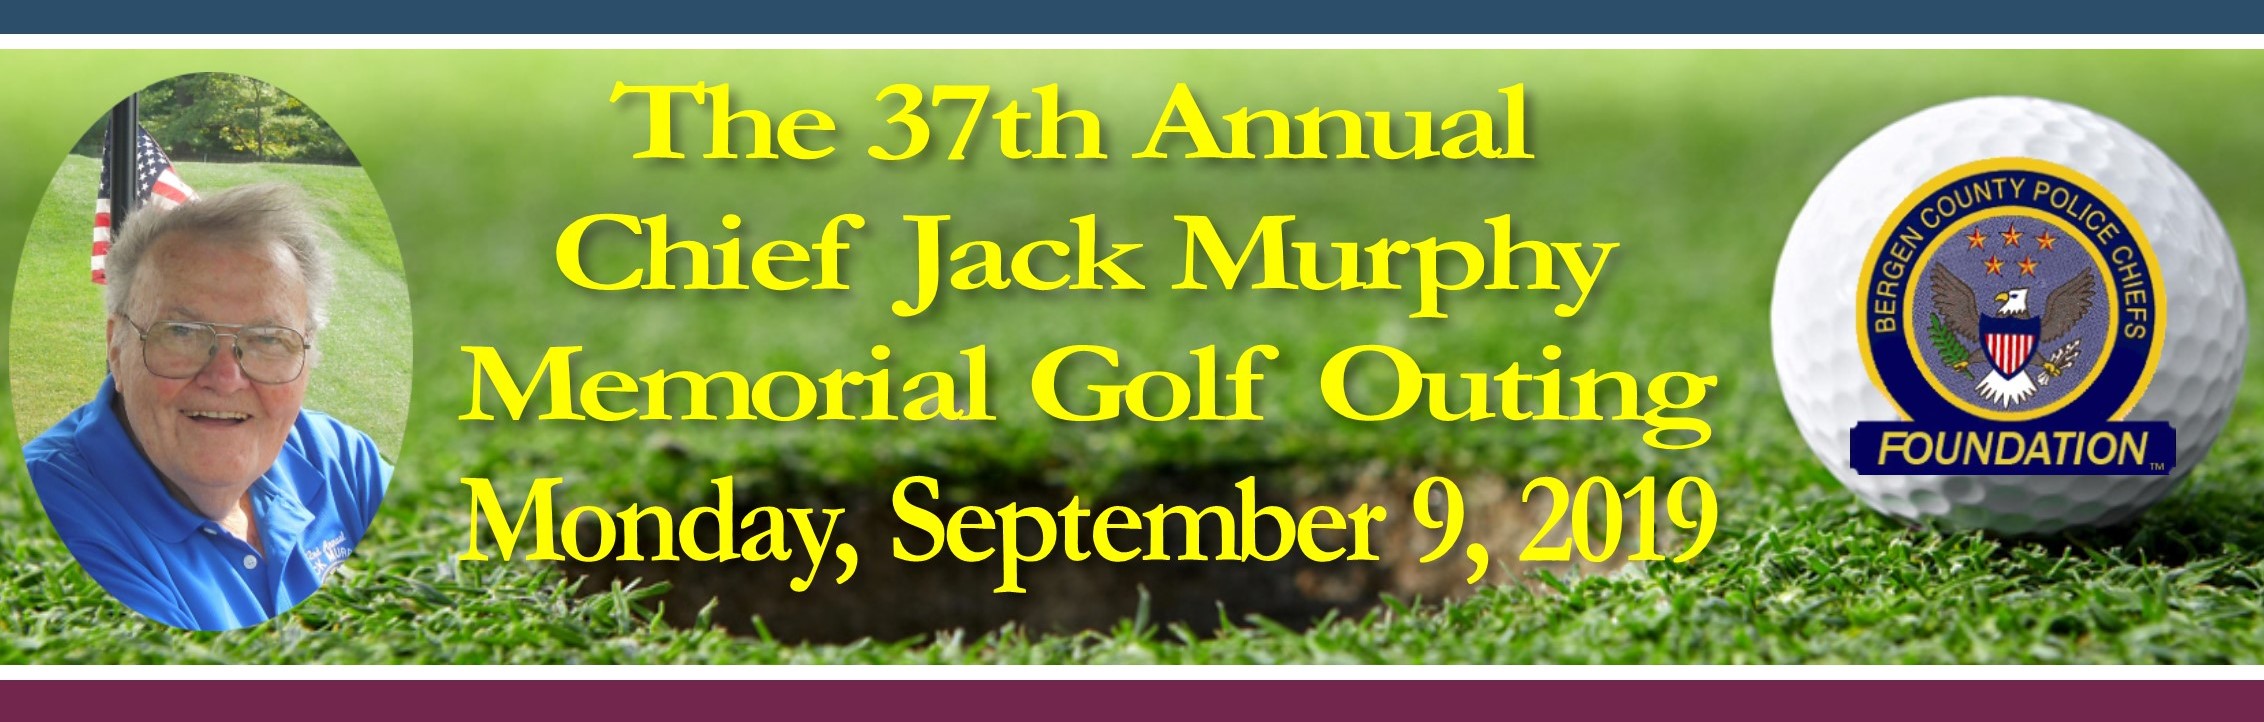 37th Annual Chief Jack Murphy Memorial Golf Outing @ White Beeches Golf & Country Club | Haworth | New Jersey | United States